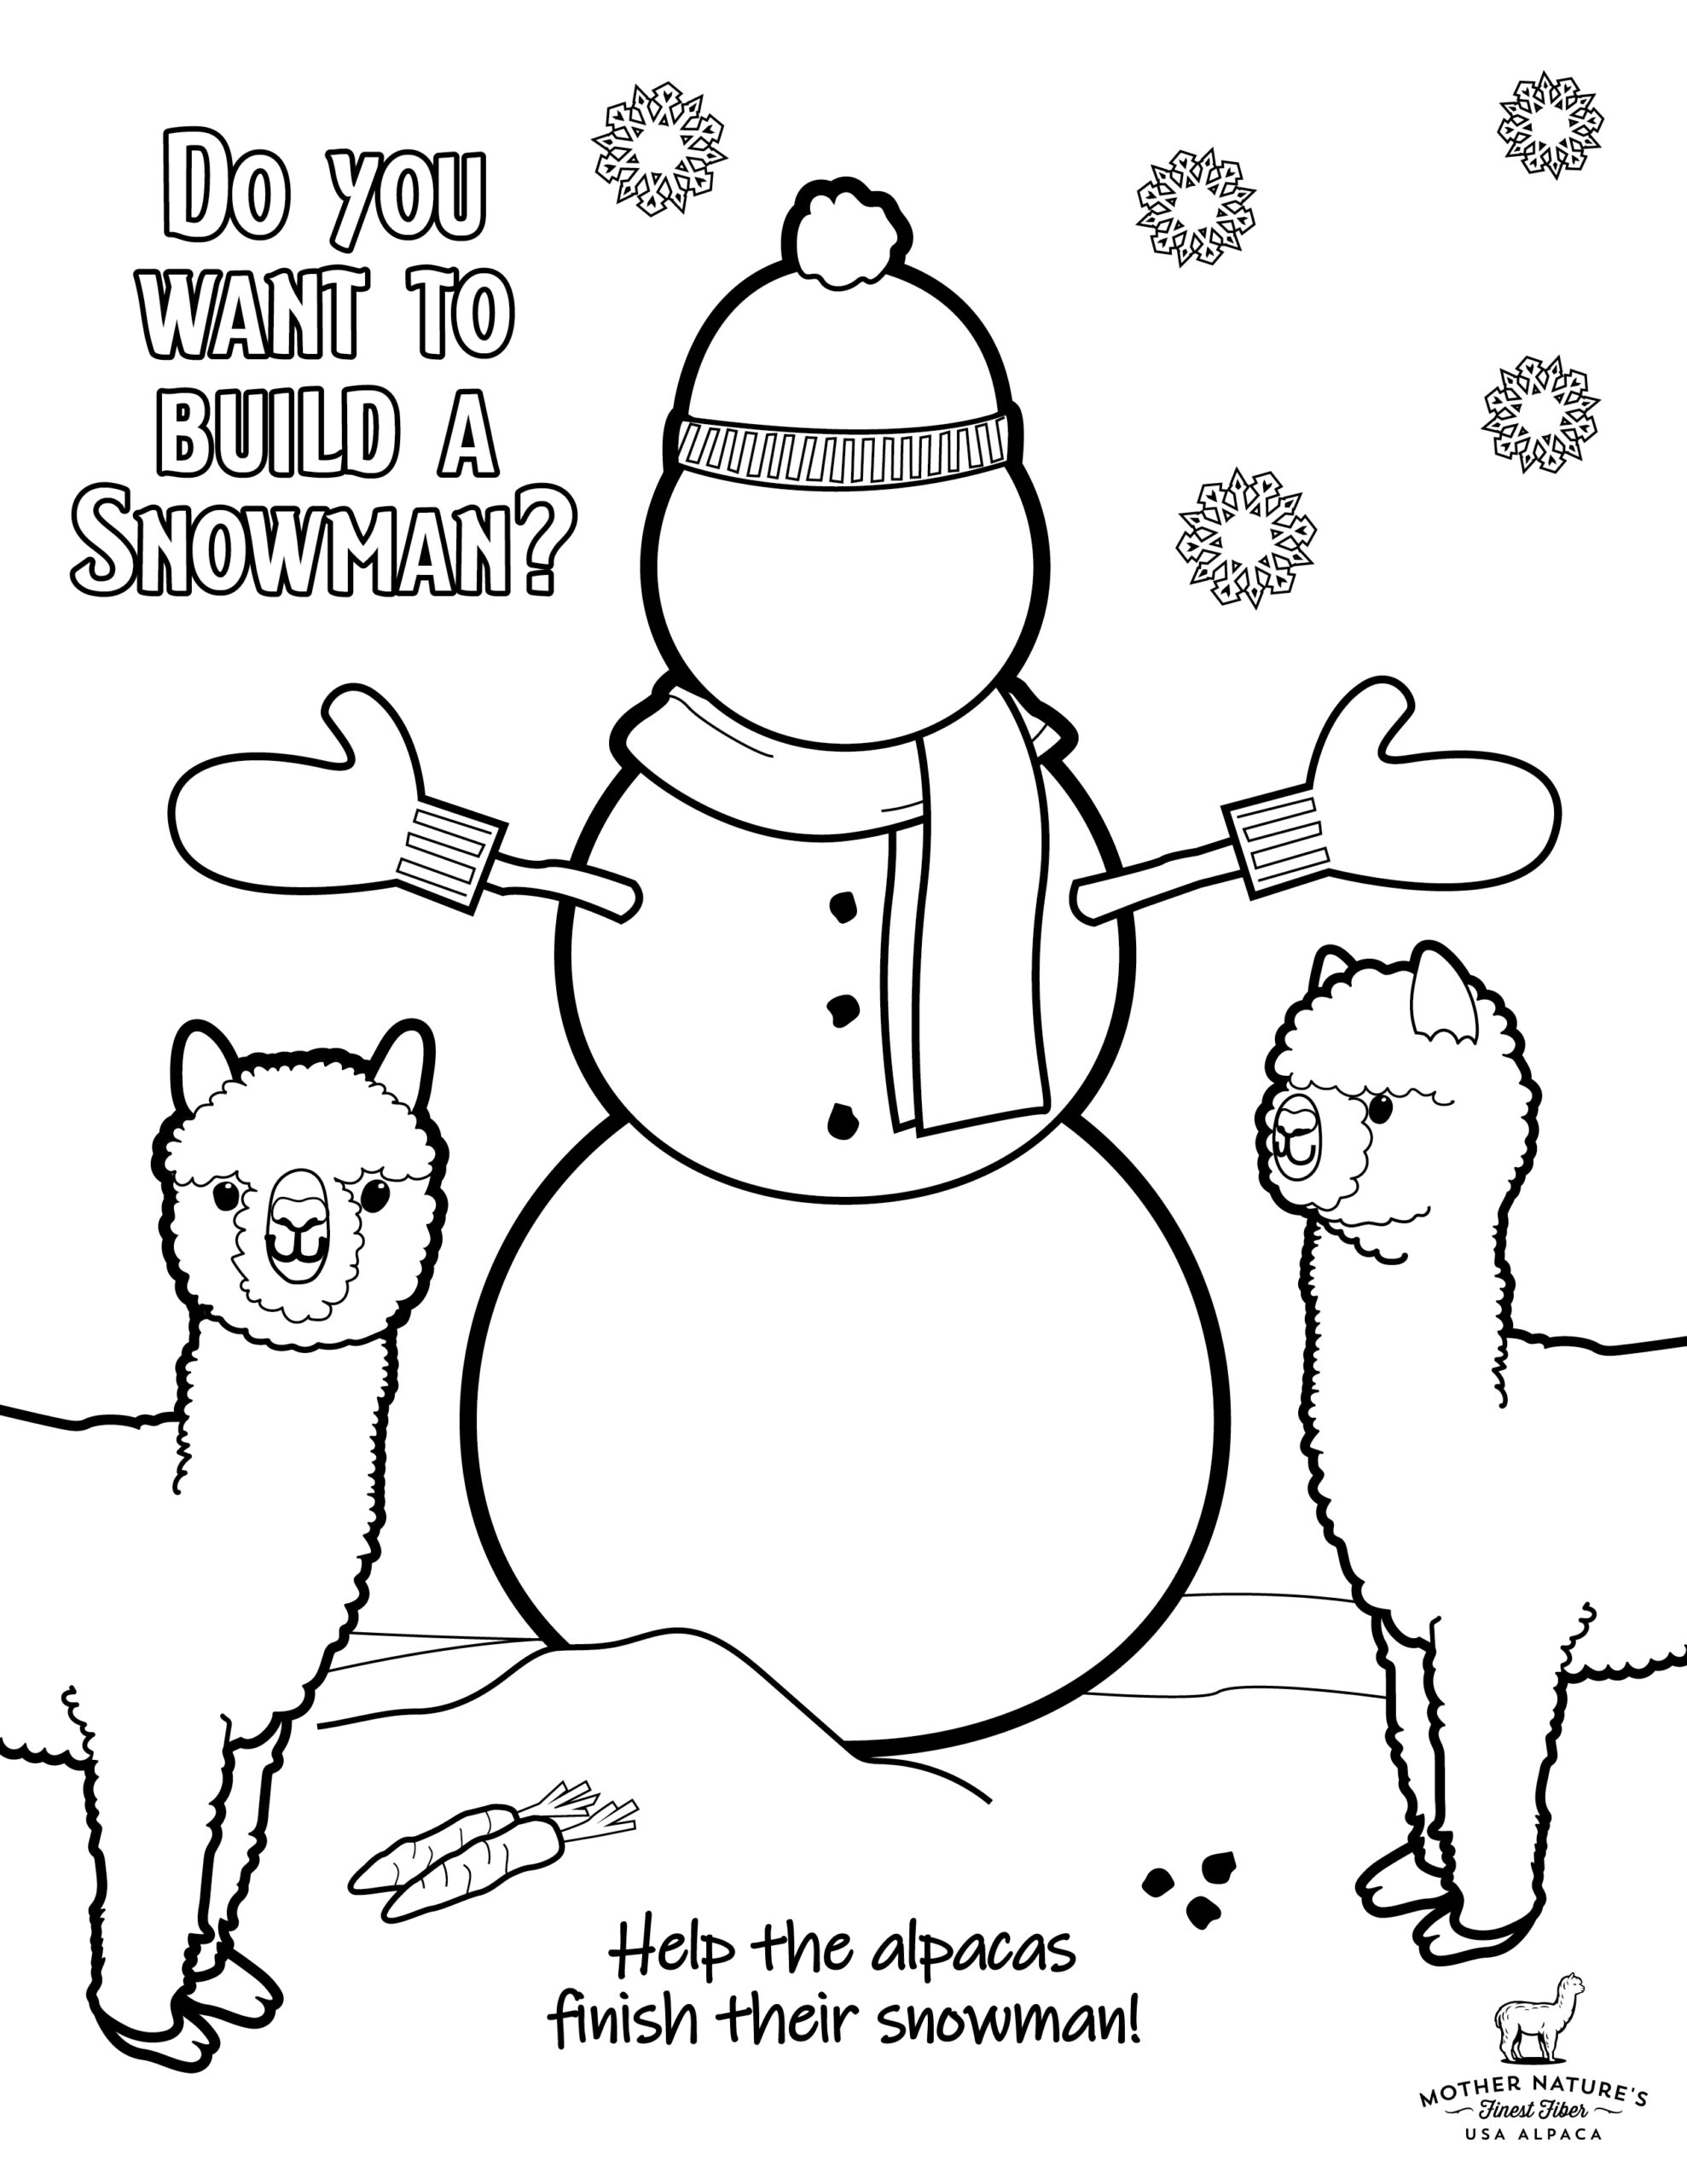 coloring-pages-new-downloadable-content-january-coloring-printer-alpaca-sheet-jan2020